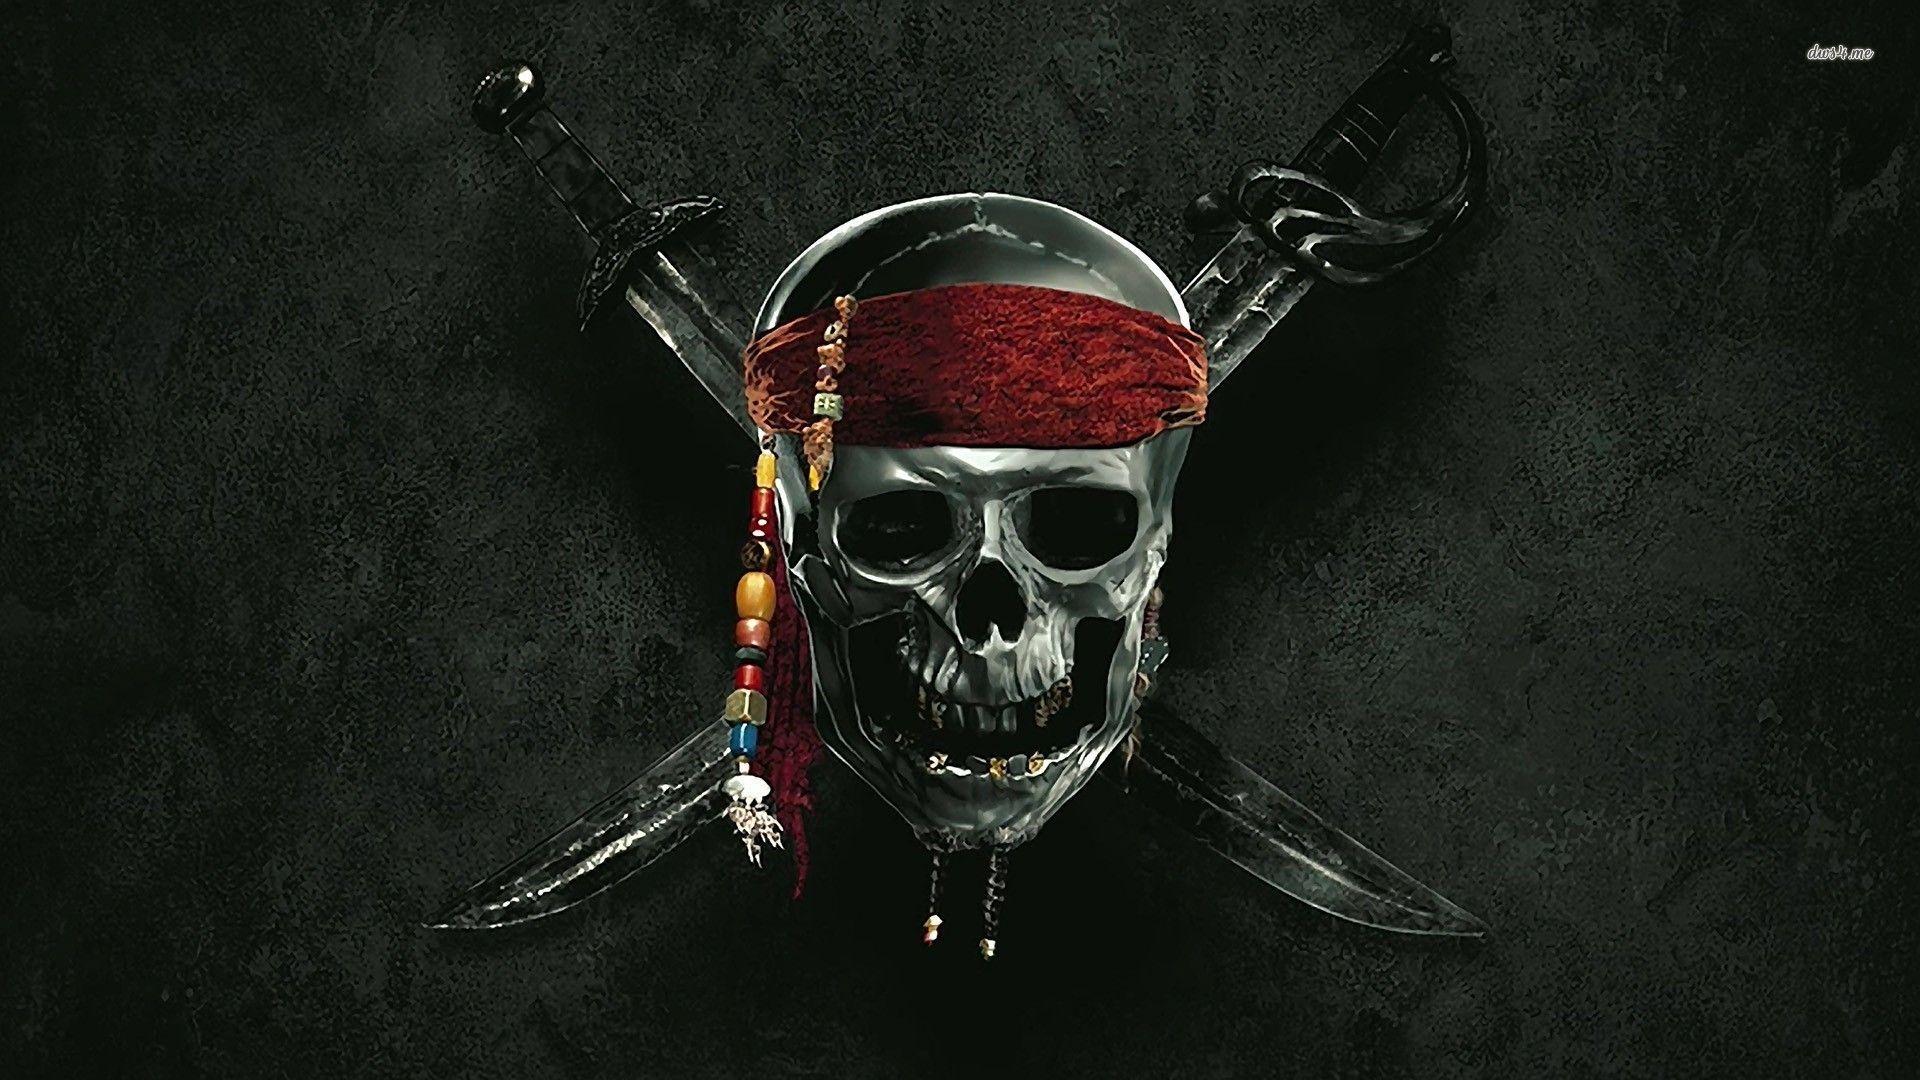 Pirates of the Caribbean download the last version for apple